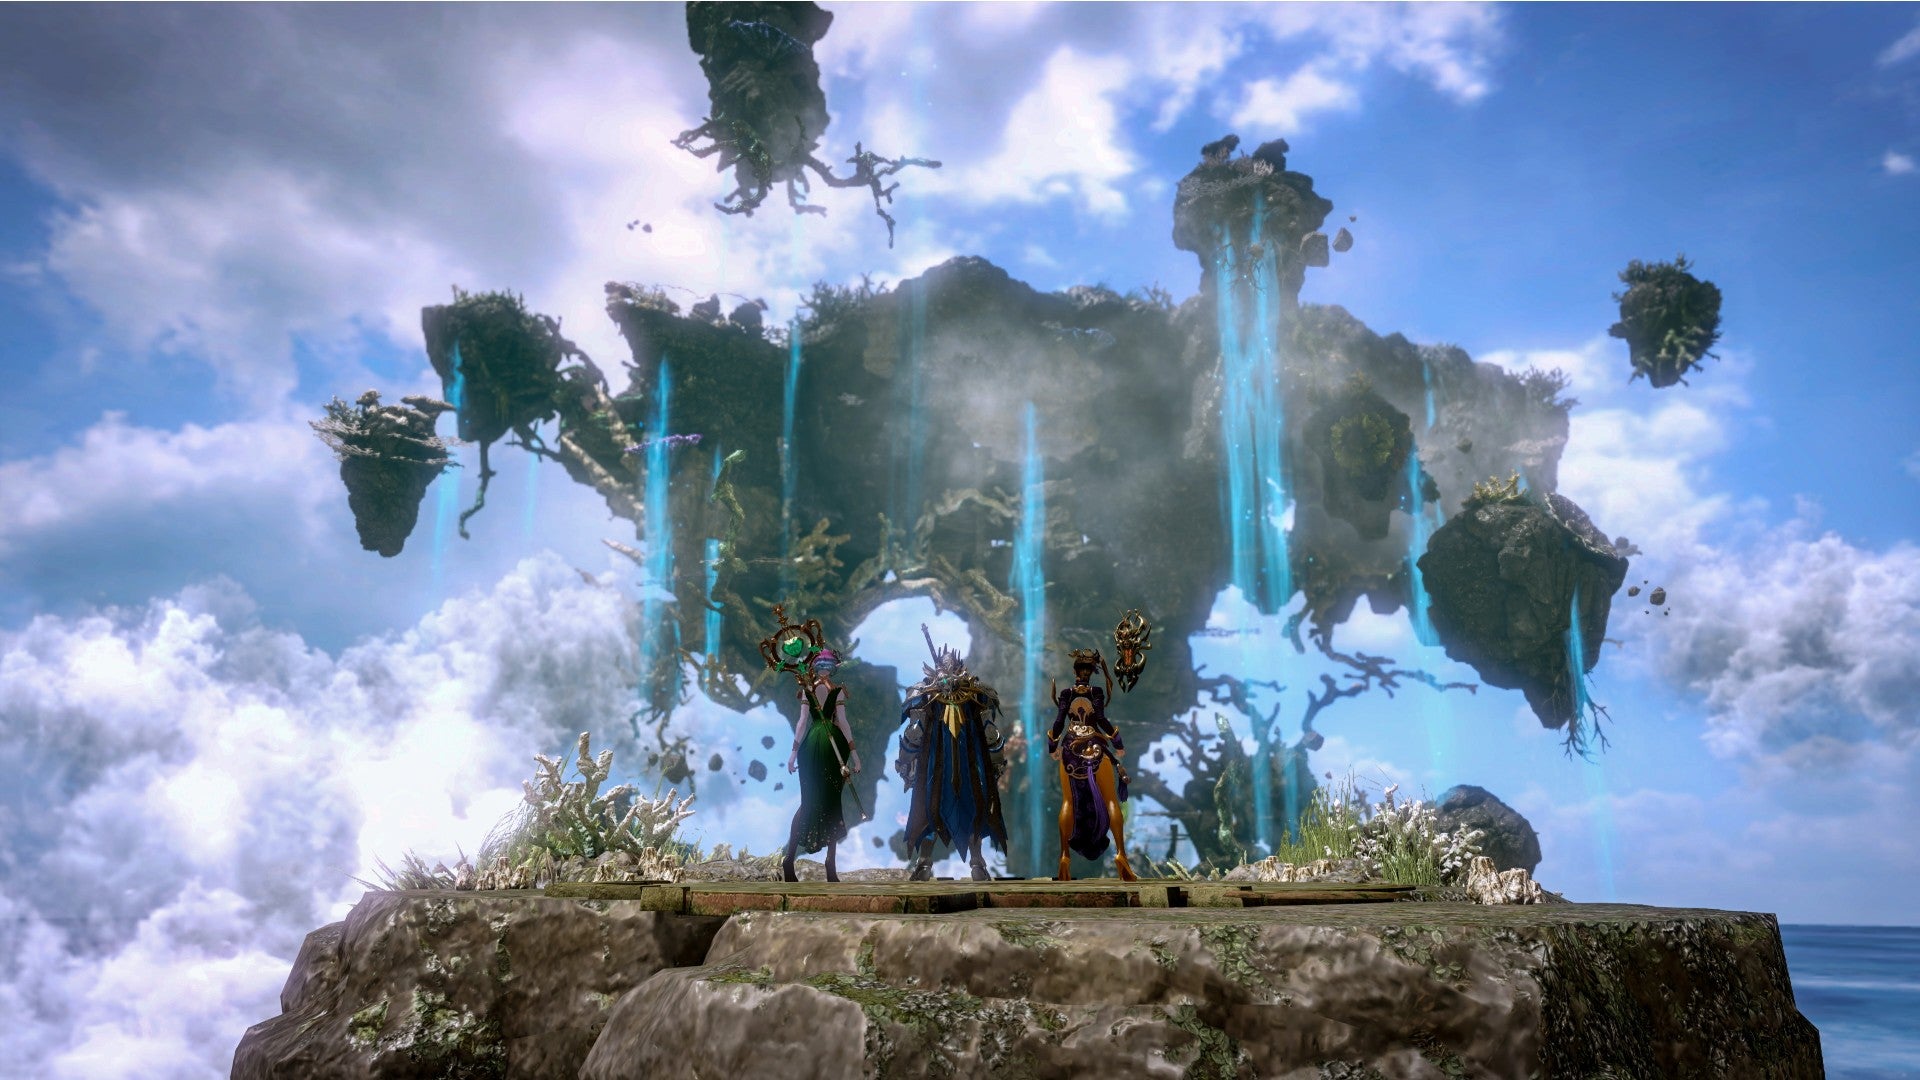 Lost Ark characters standing on the edge of a cliff with beautiful blue skies above. They stare at a large floating rock that hangs in the sky.